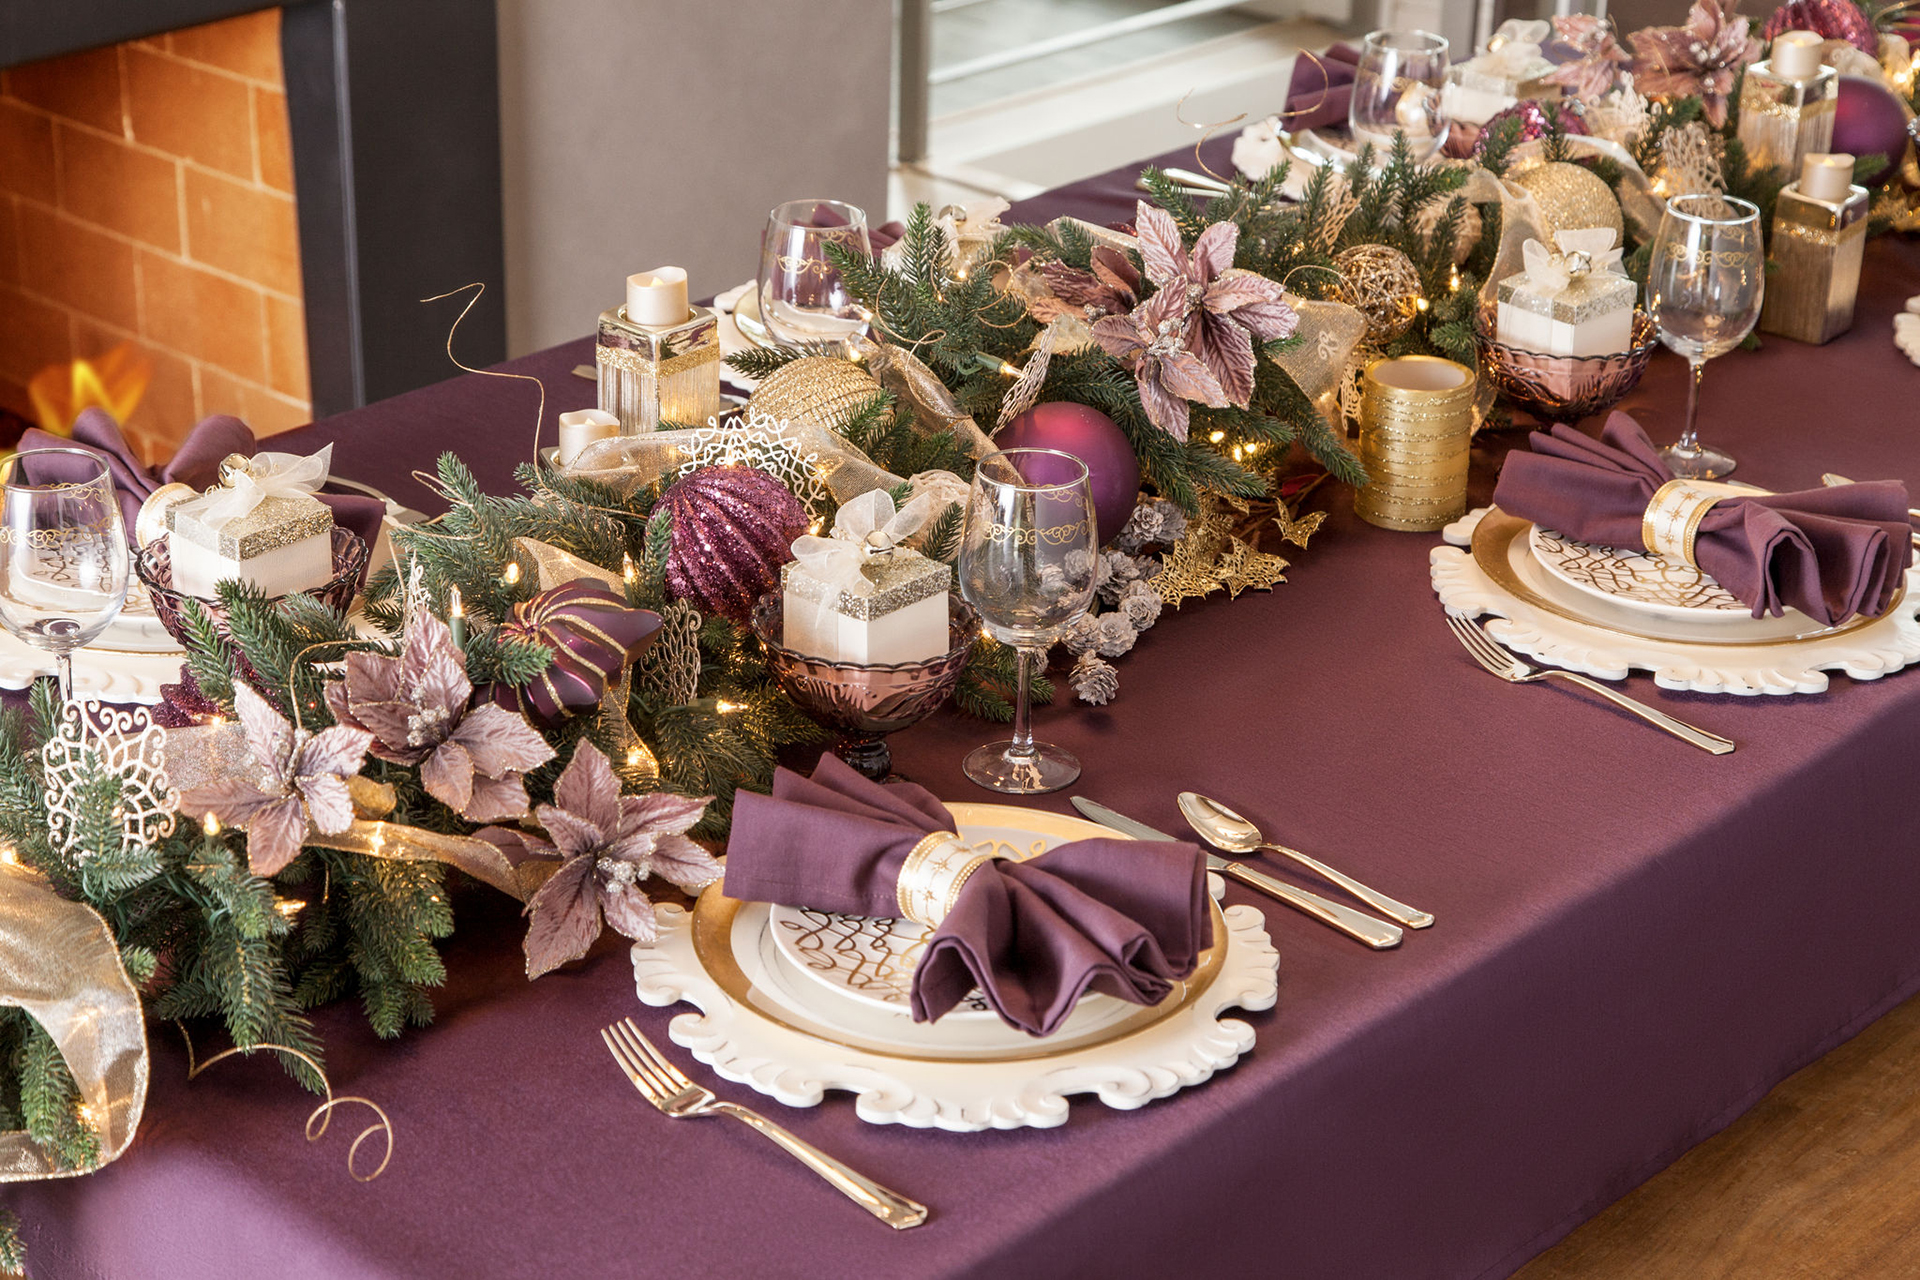 5 ways to elevate your holiday table decor